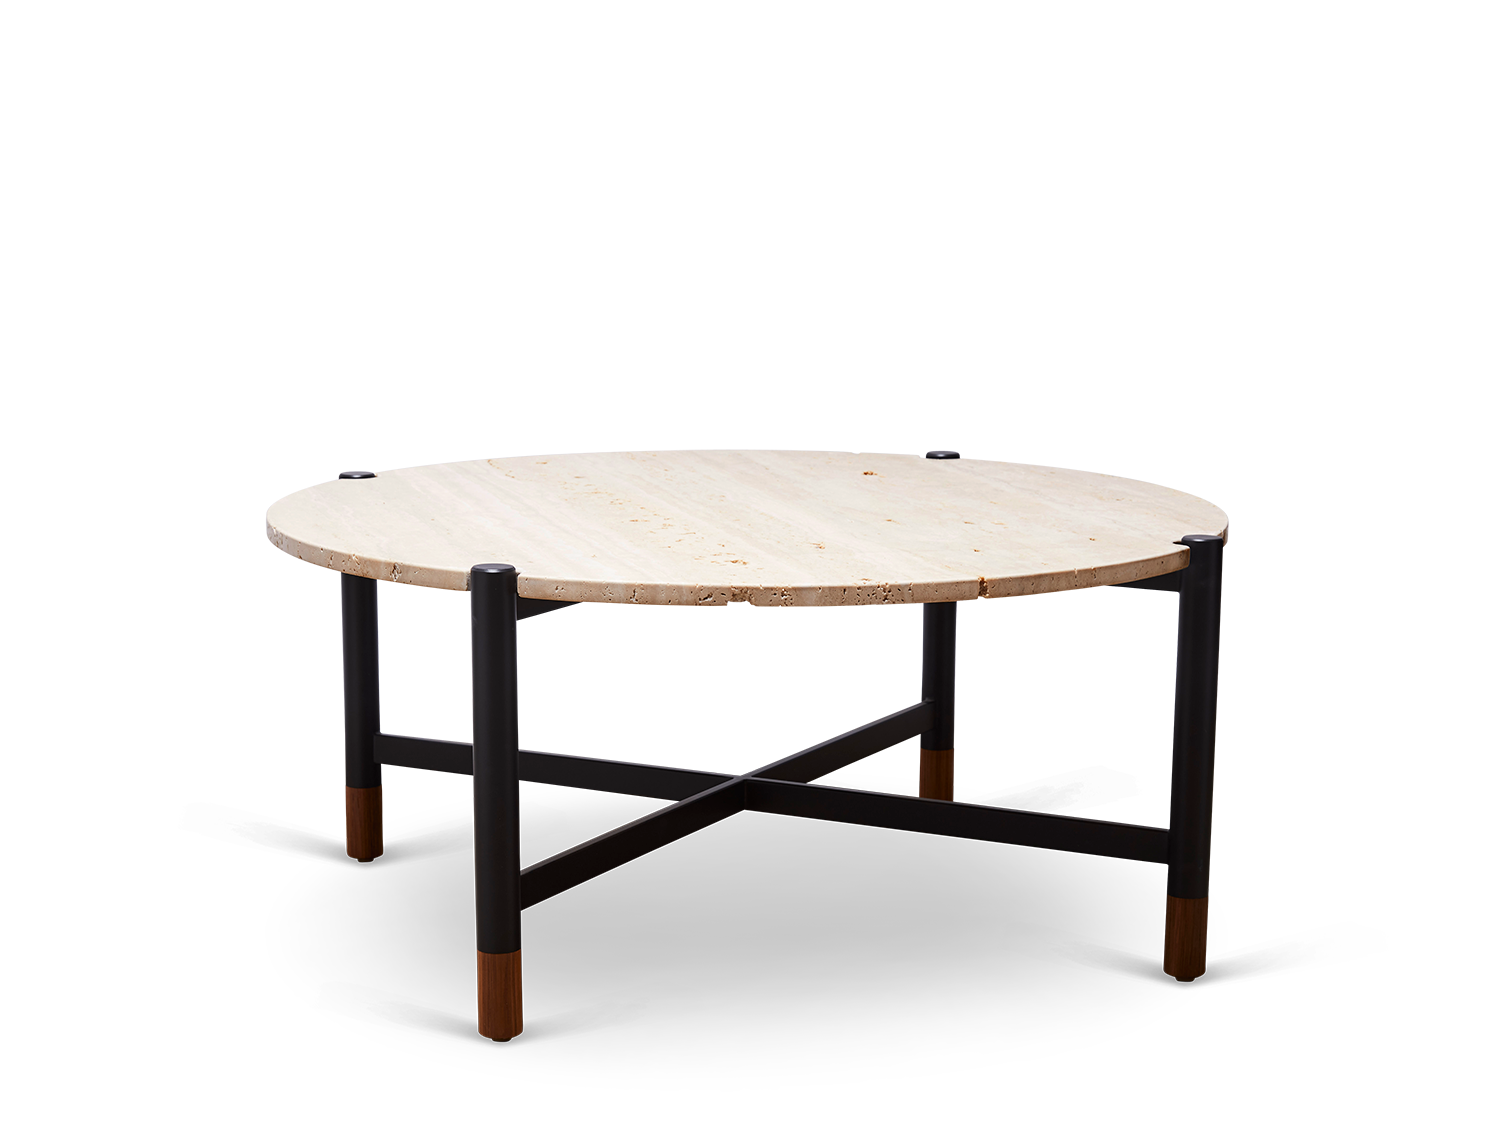 Bronson Coffee Table Round - Outdoor